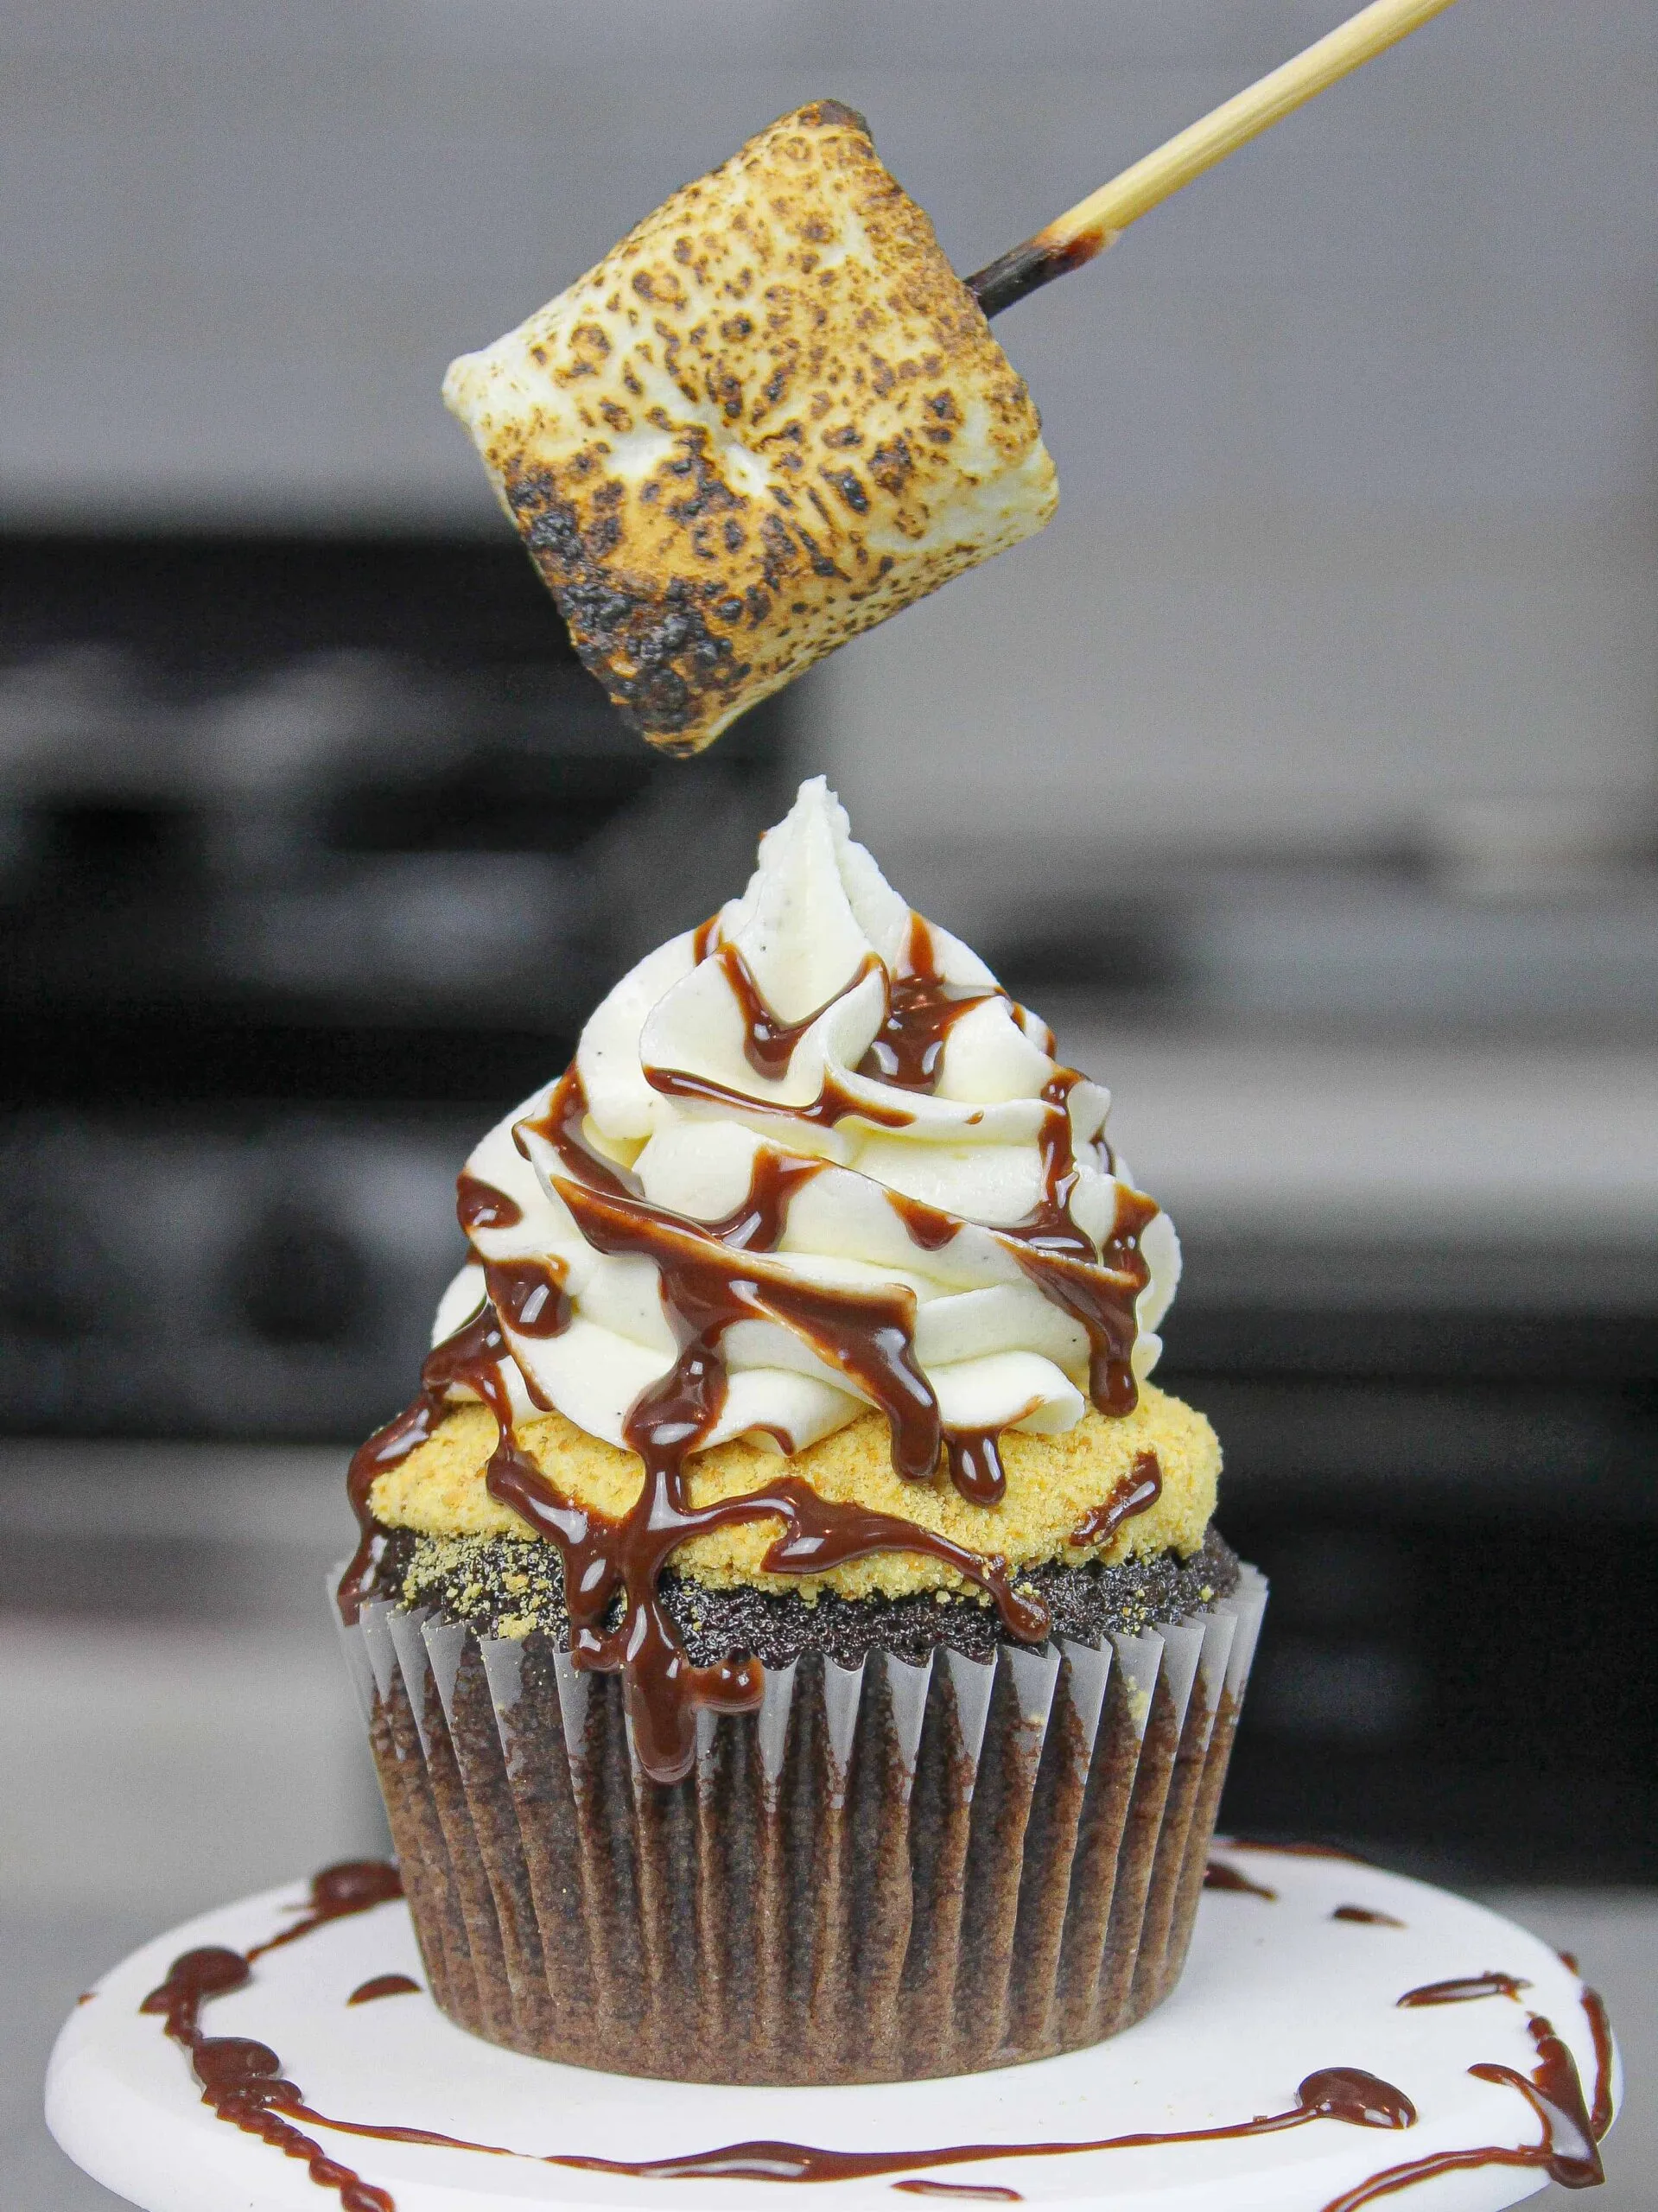 image of a toasted marshmallow being added on top of a s'mores cupcake